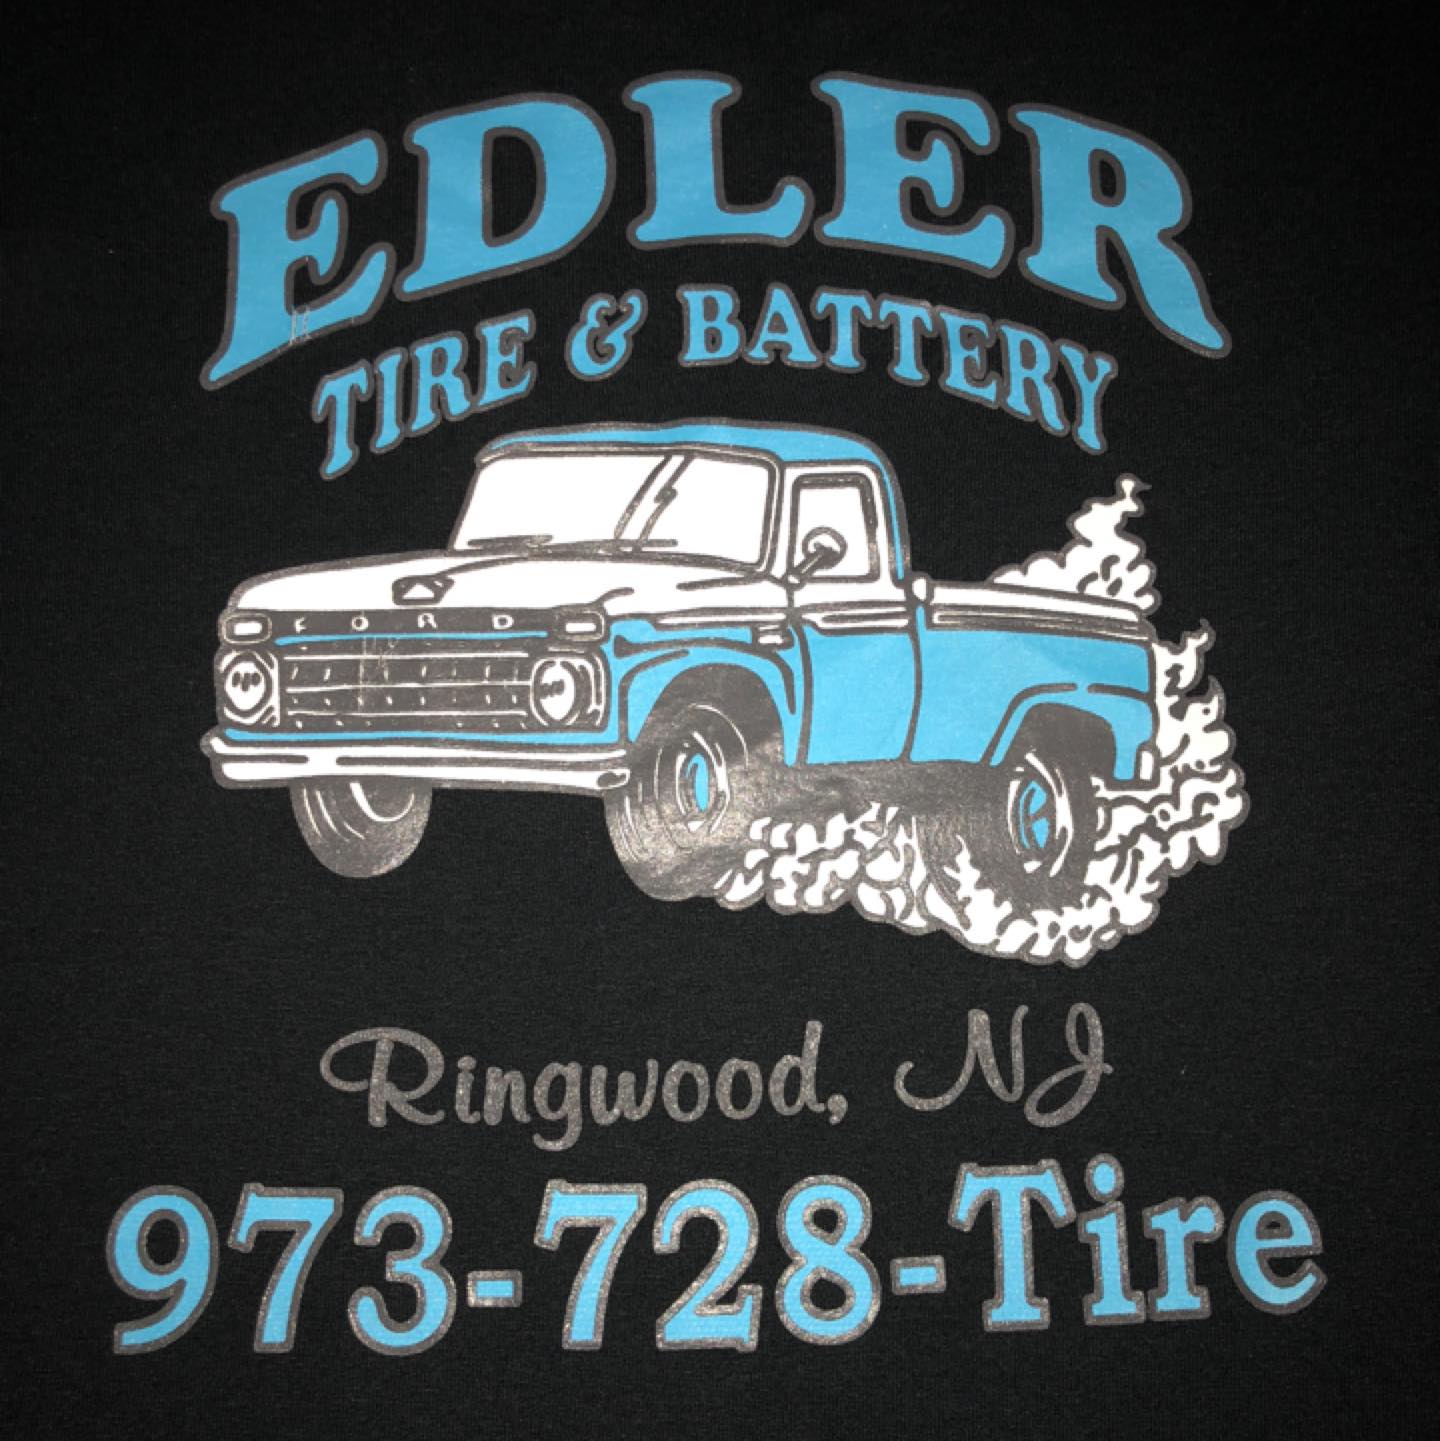 Edler Tire and Battery